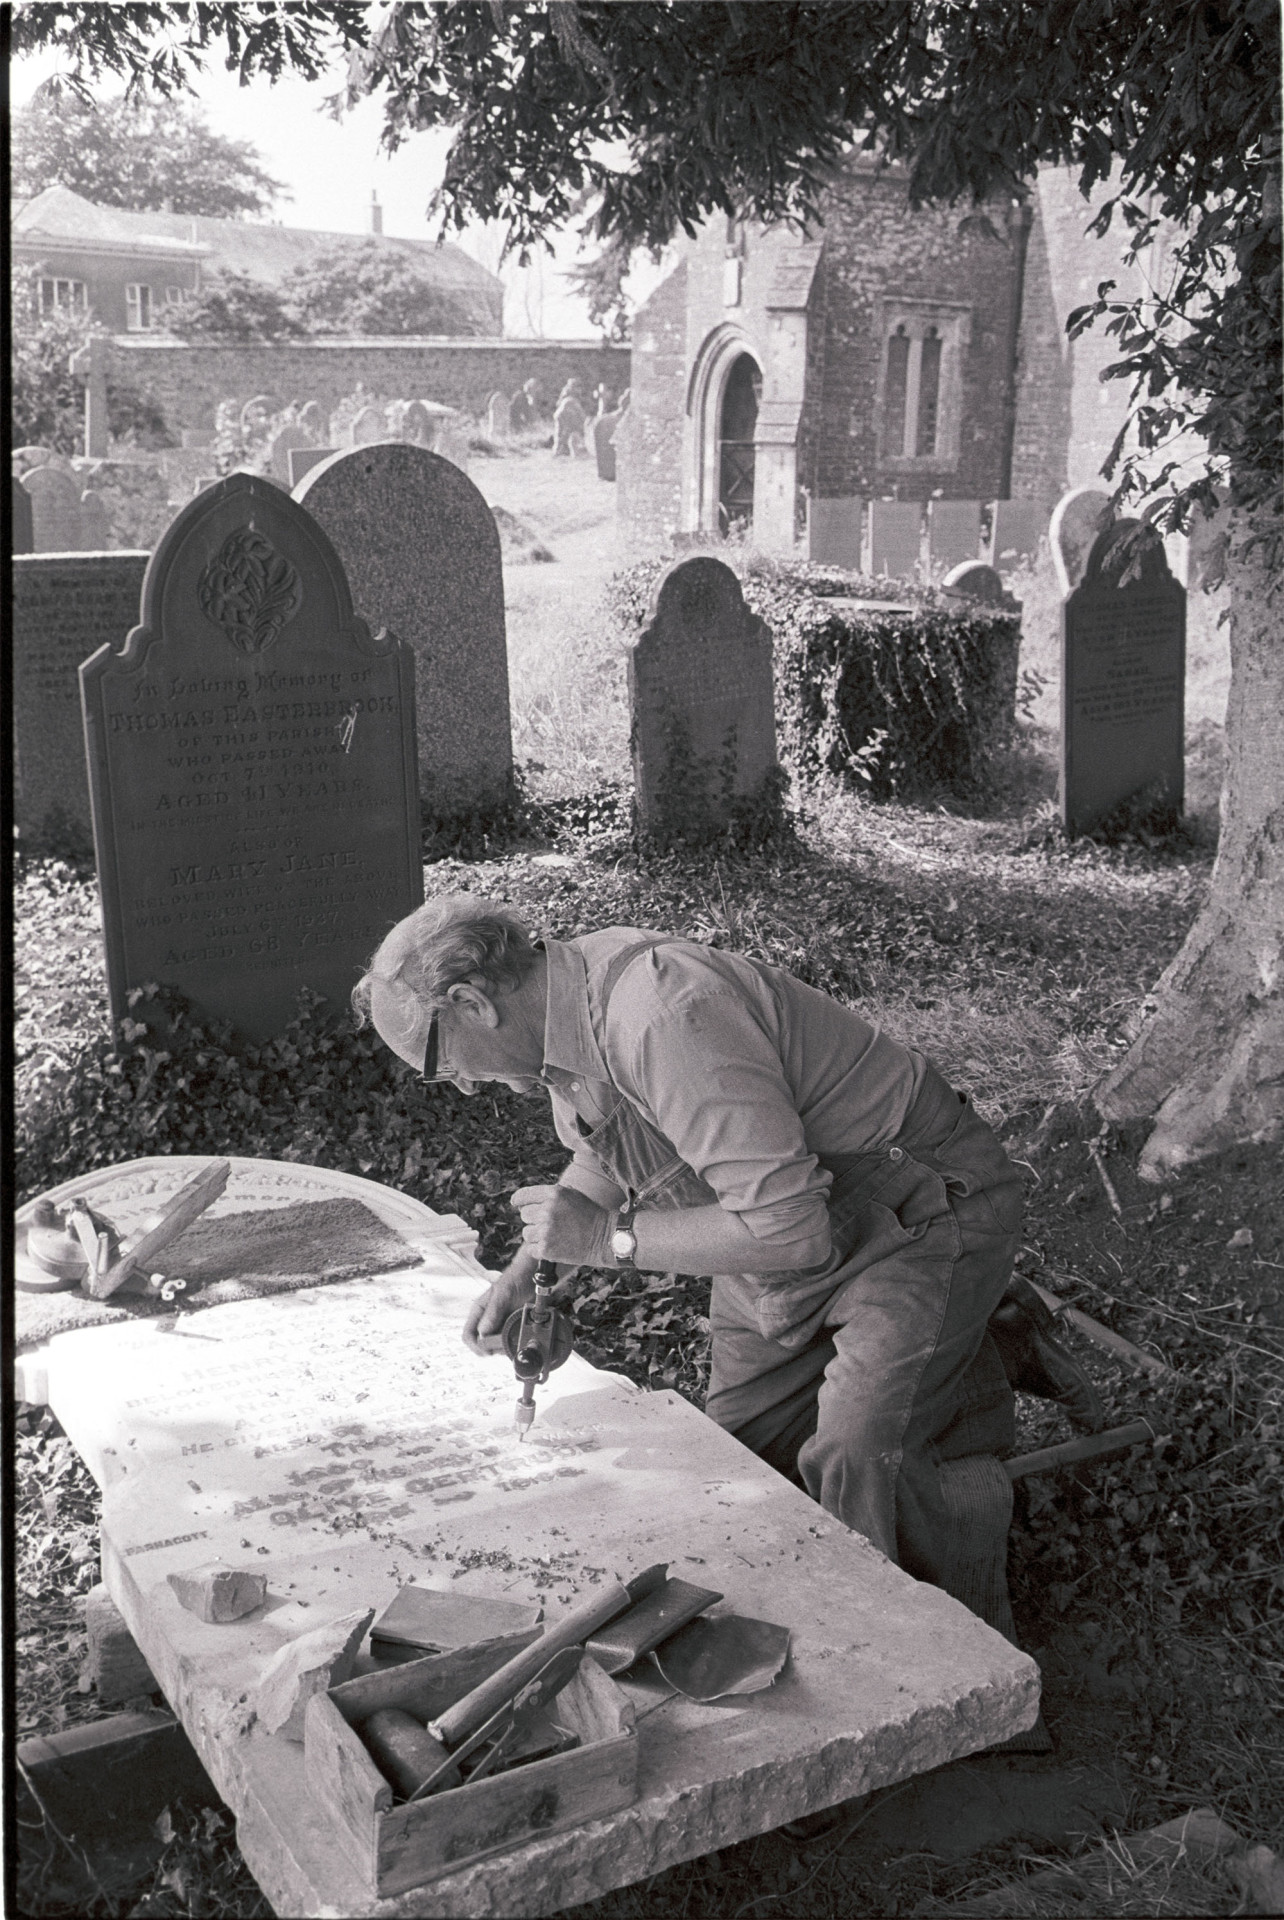 Man working on gravestone, this had been worked by his father and his boss before him. 
[Bruce Edyvean, Monumental Mason, adding an inscription to a gravestone in Beaford churchyard, using a hand drill. Other gravestones and the church porch are visible in the background.]